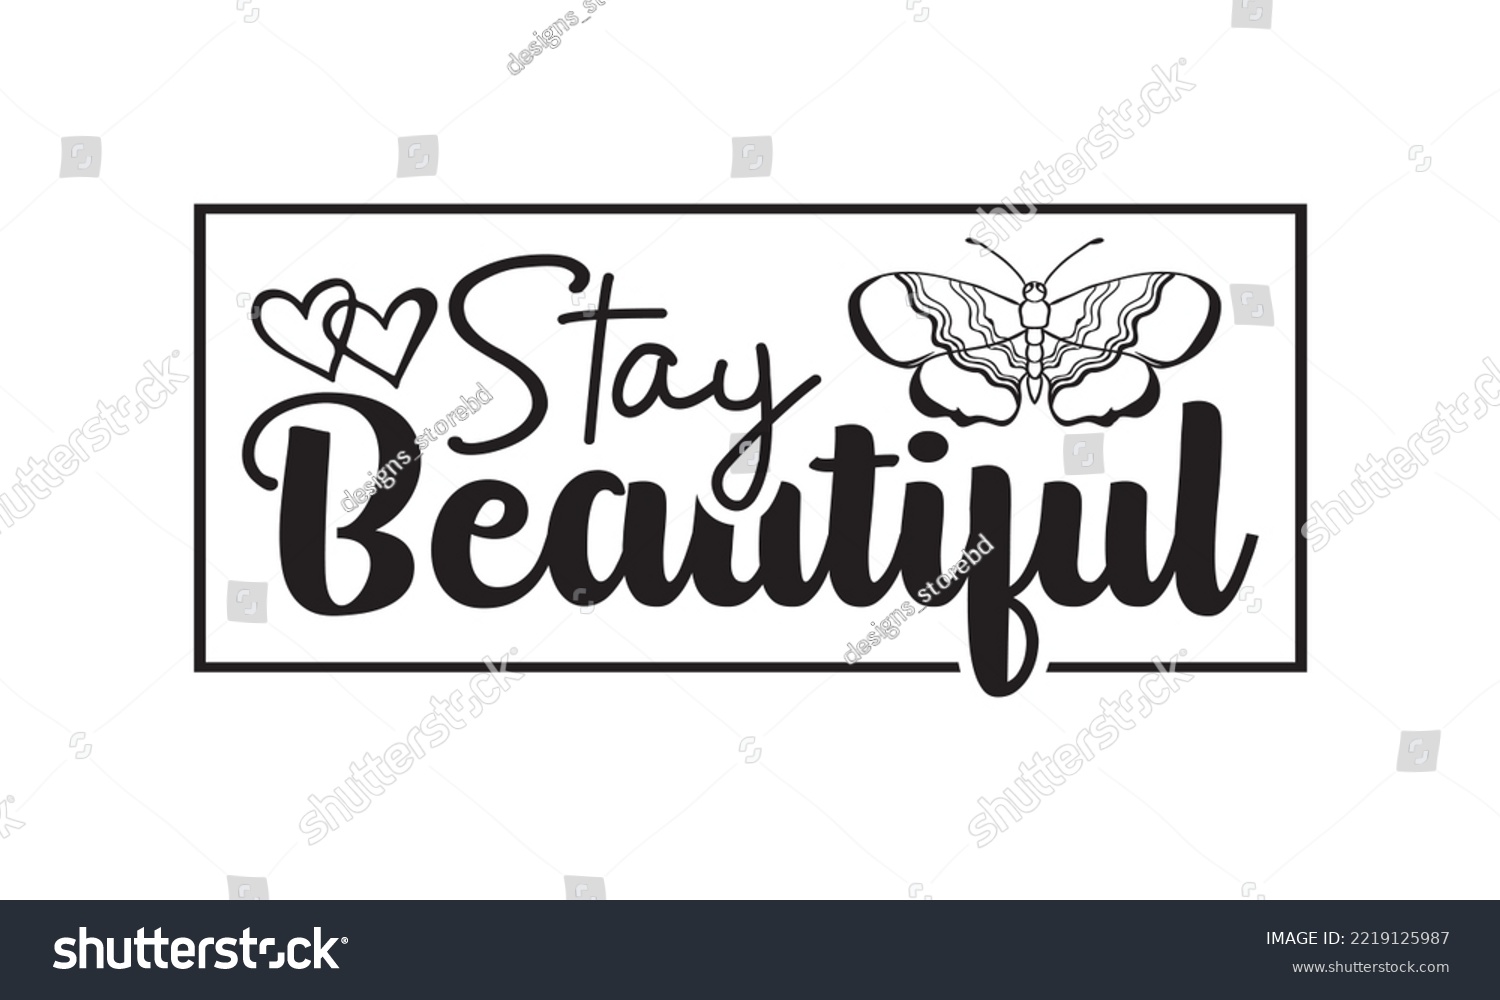 SVG of Stay Beautiful Svg, Butterfly svg, Butterfly svg t-shirt design, butterflies and daisies positive quote flower watercolor margarita mariposa stationery, mug, t shirt, svg, eps 10 svg